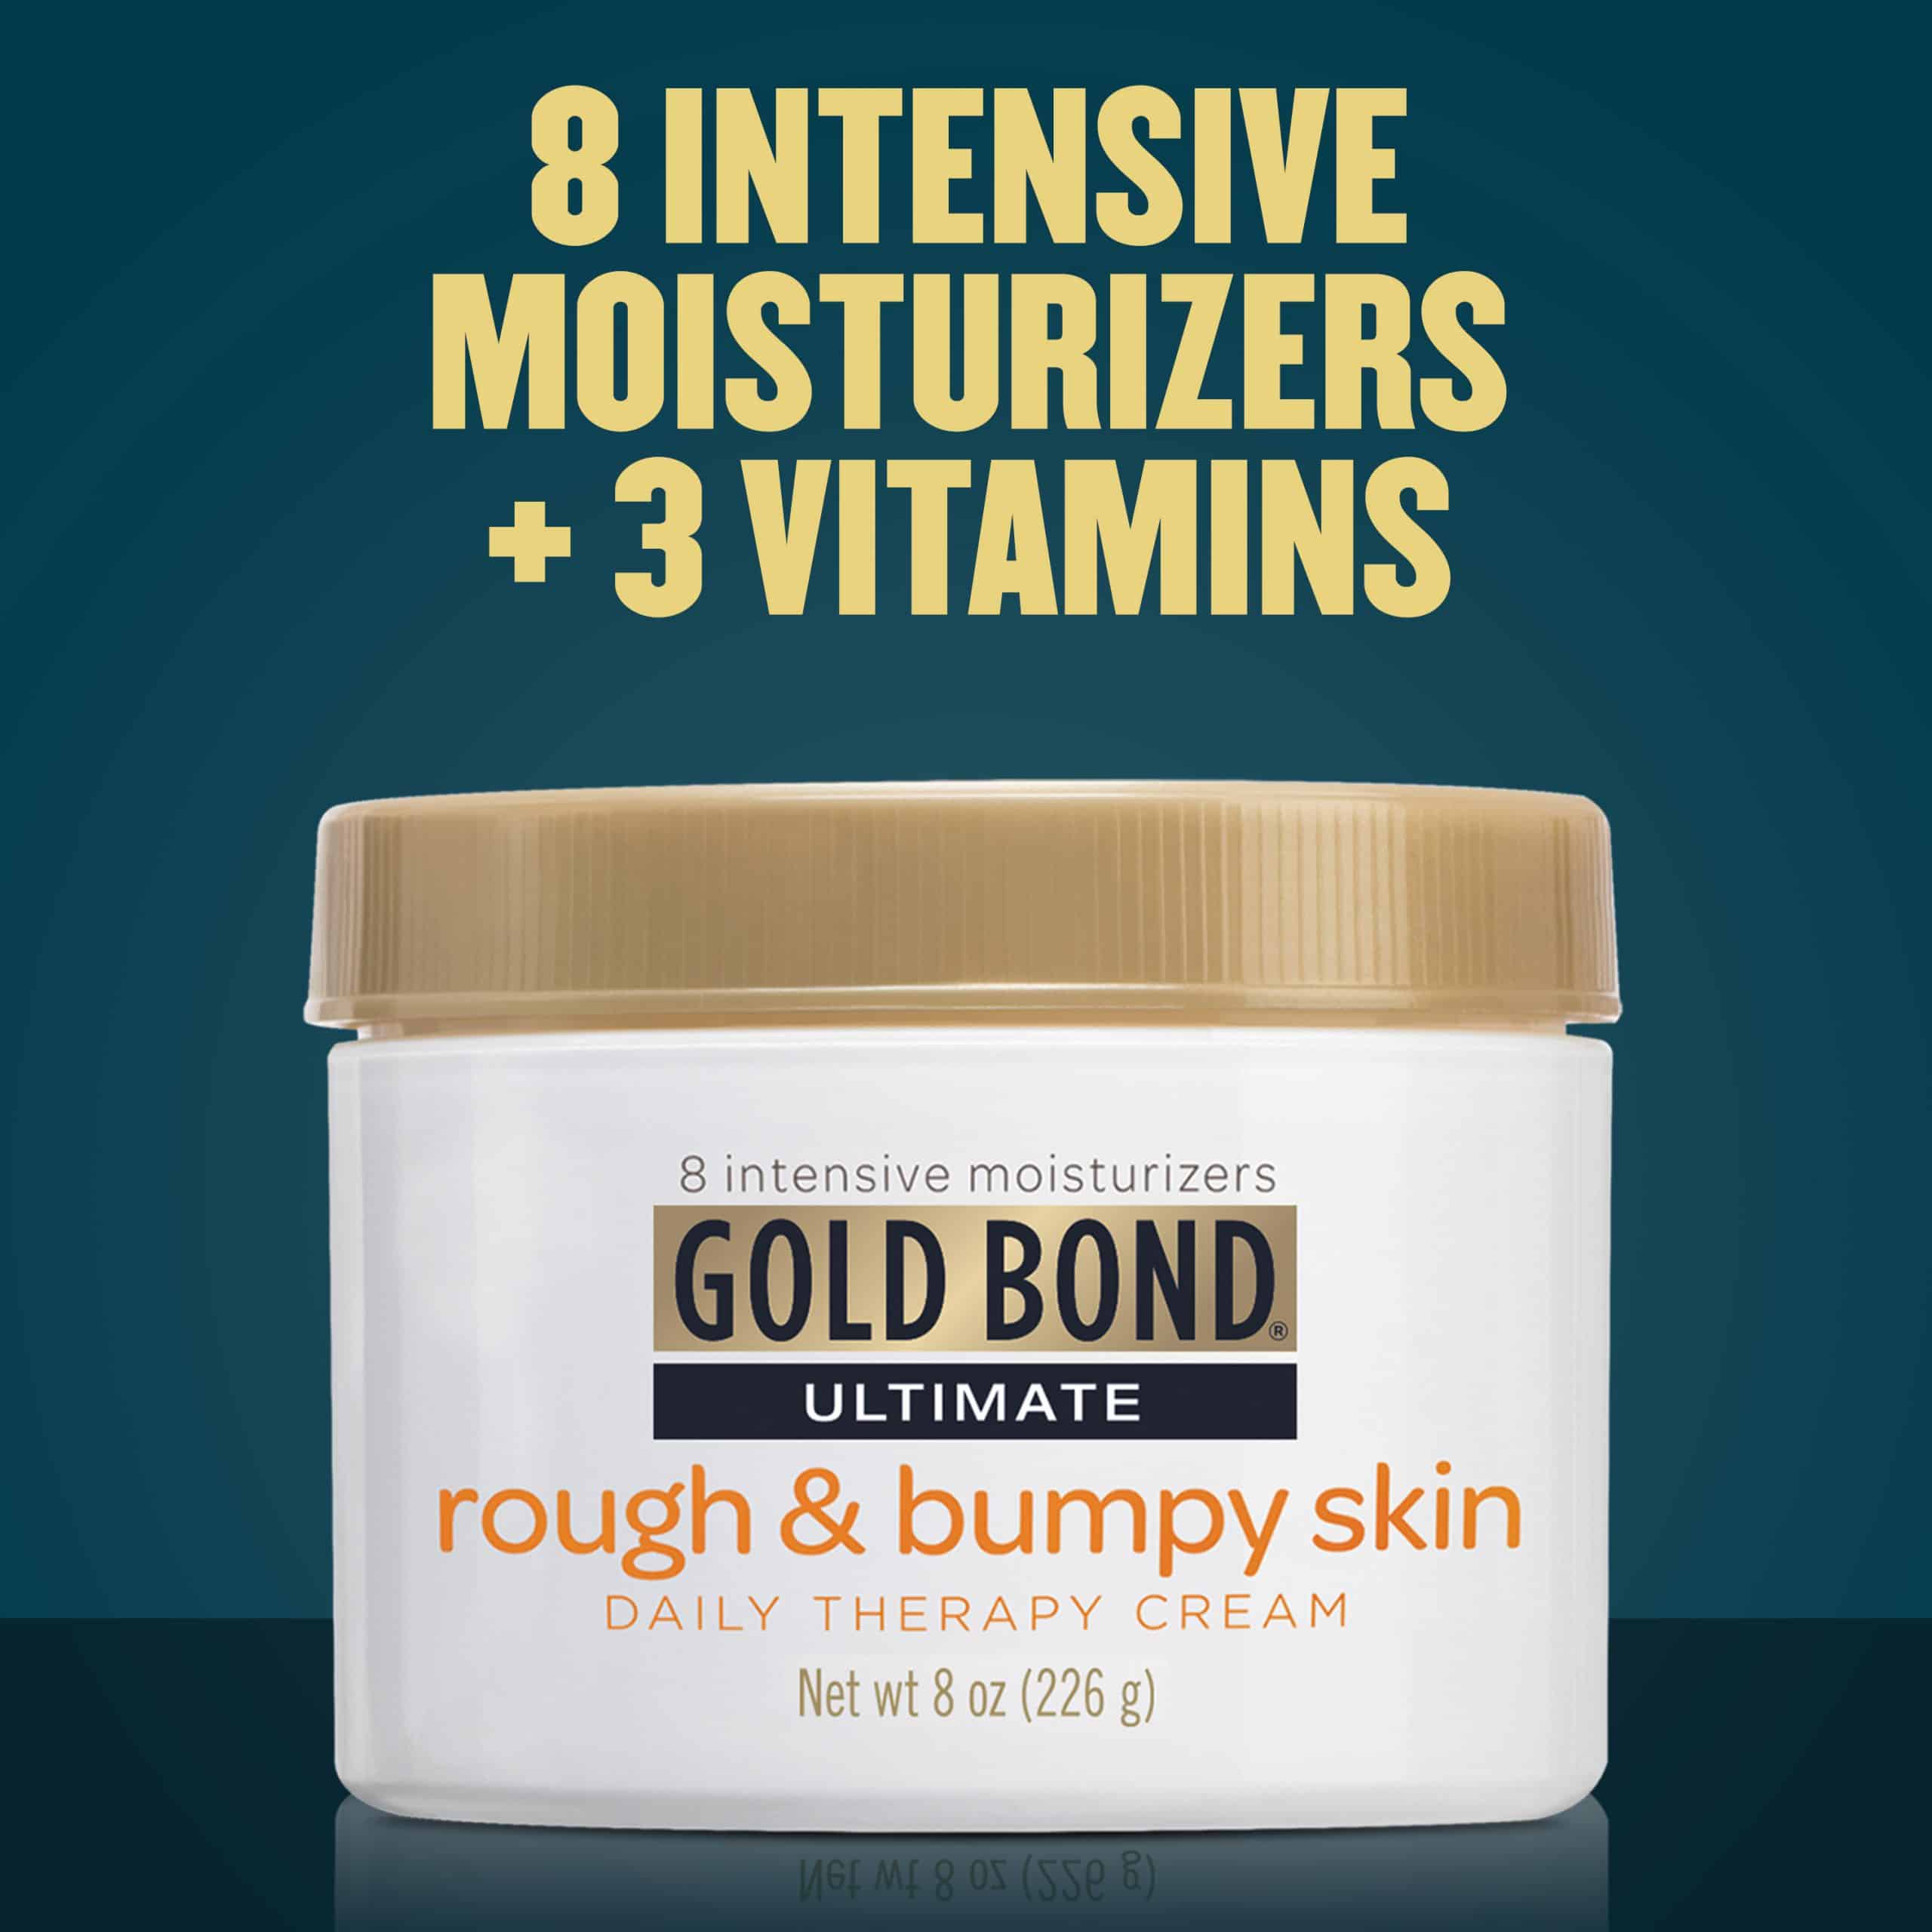 Gold Bond Lotion Rough And Bumpy : Gold Bond Ultimate Rough And Bumpy ...